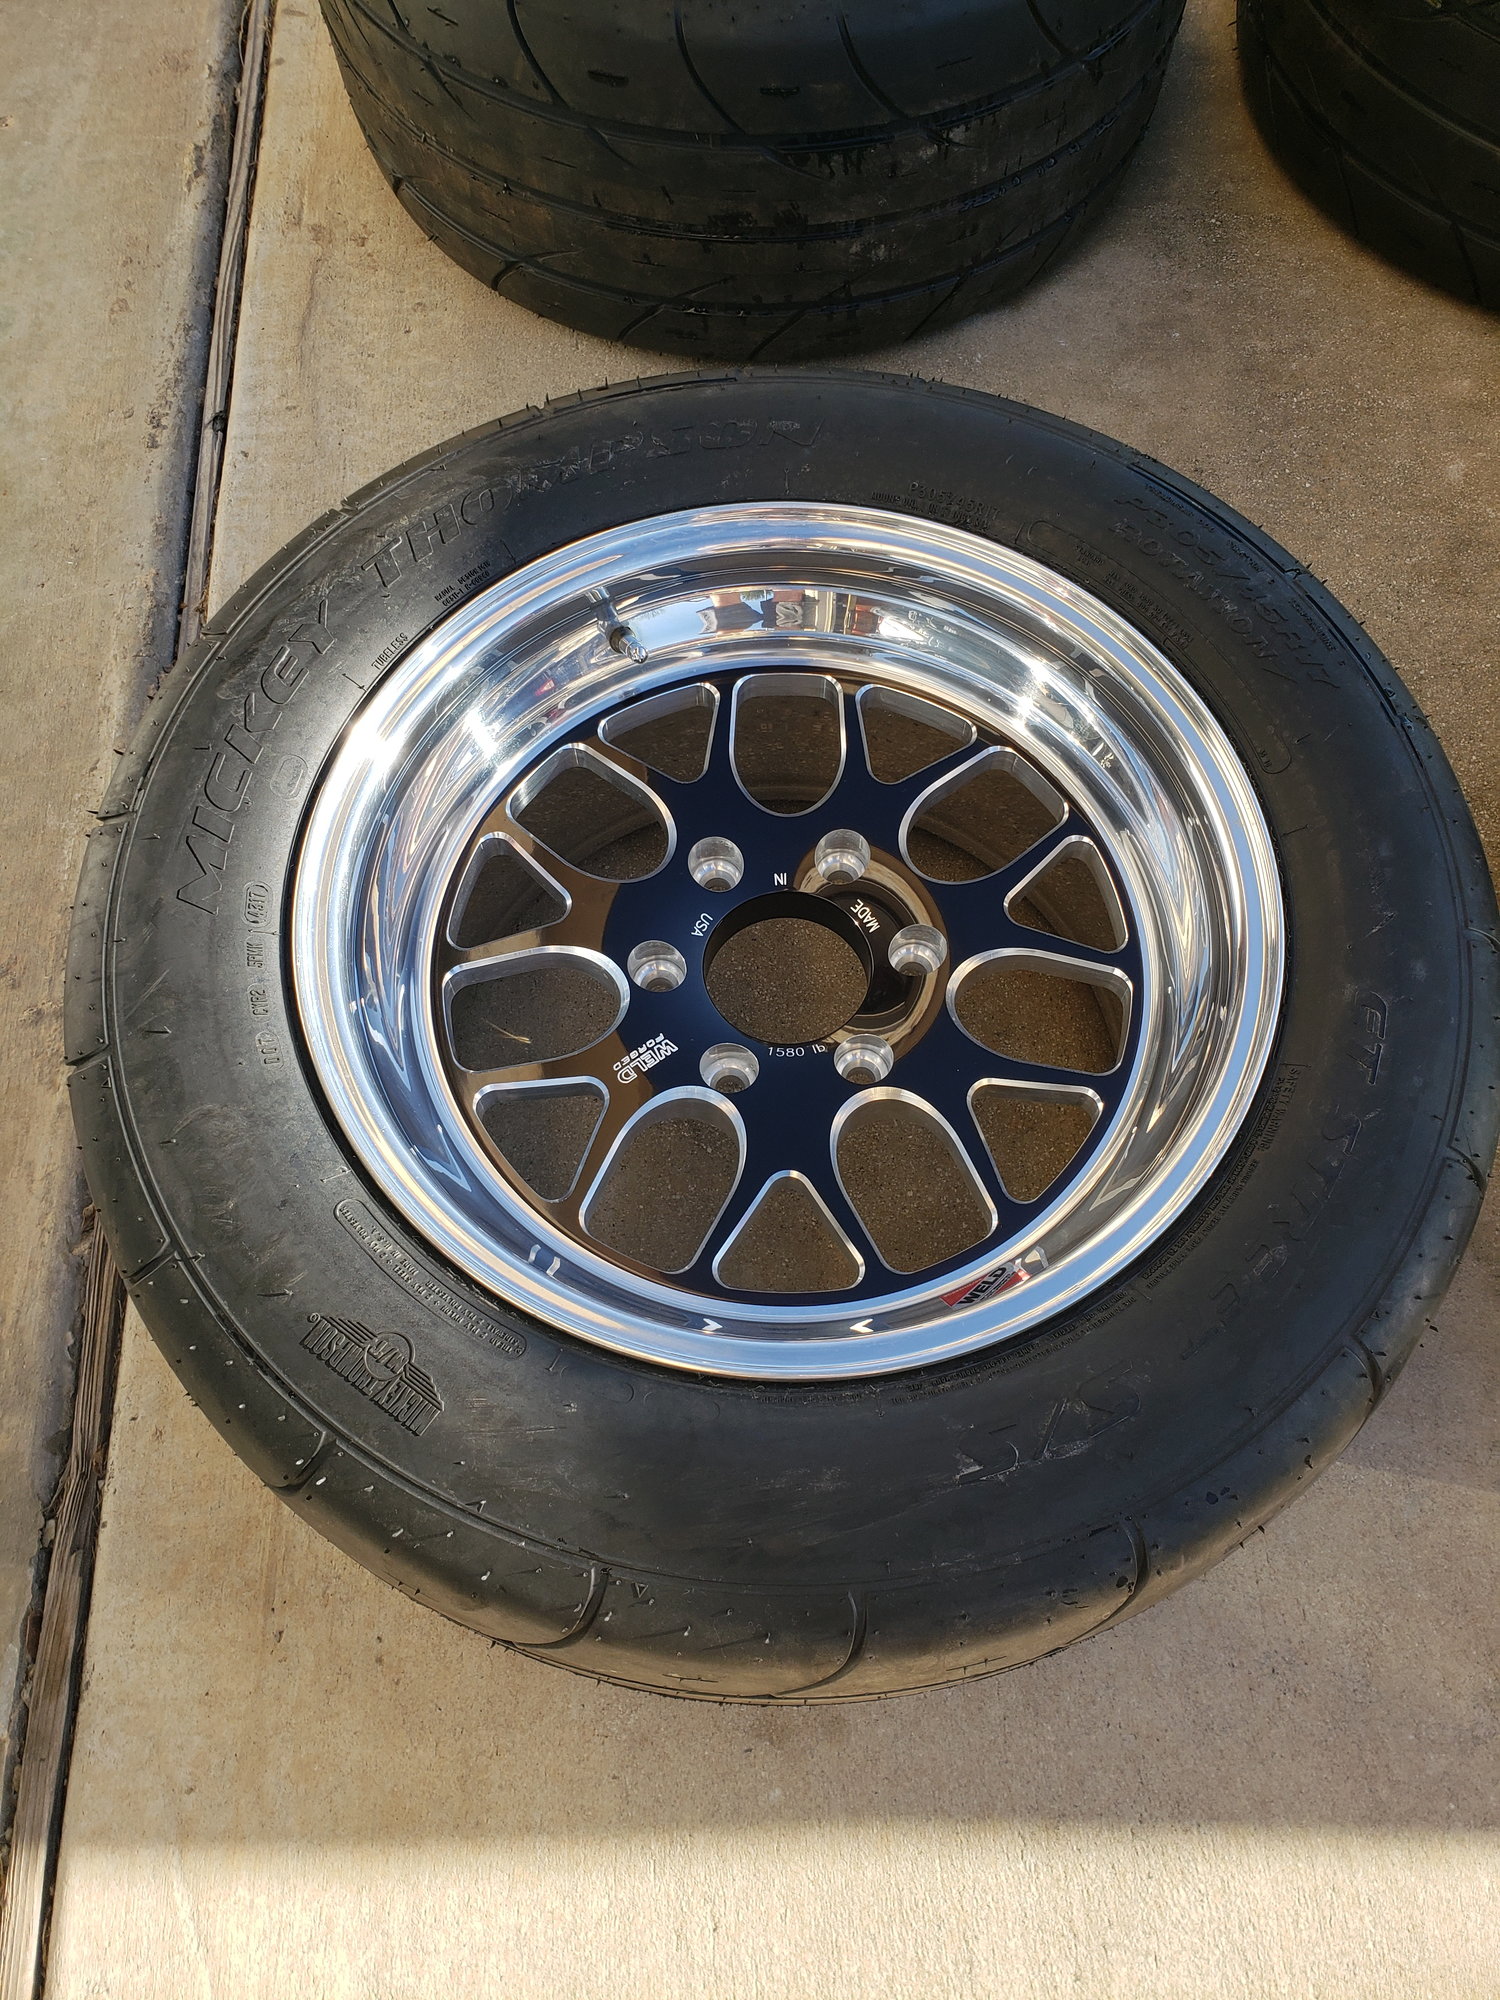 4 New Weld s77 wheels with M/T drag radials - PerformanceTrucks.net Forums